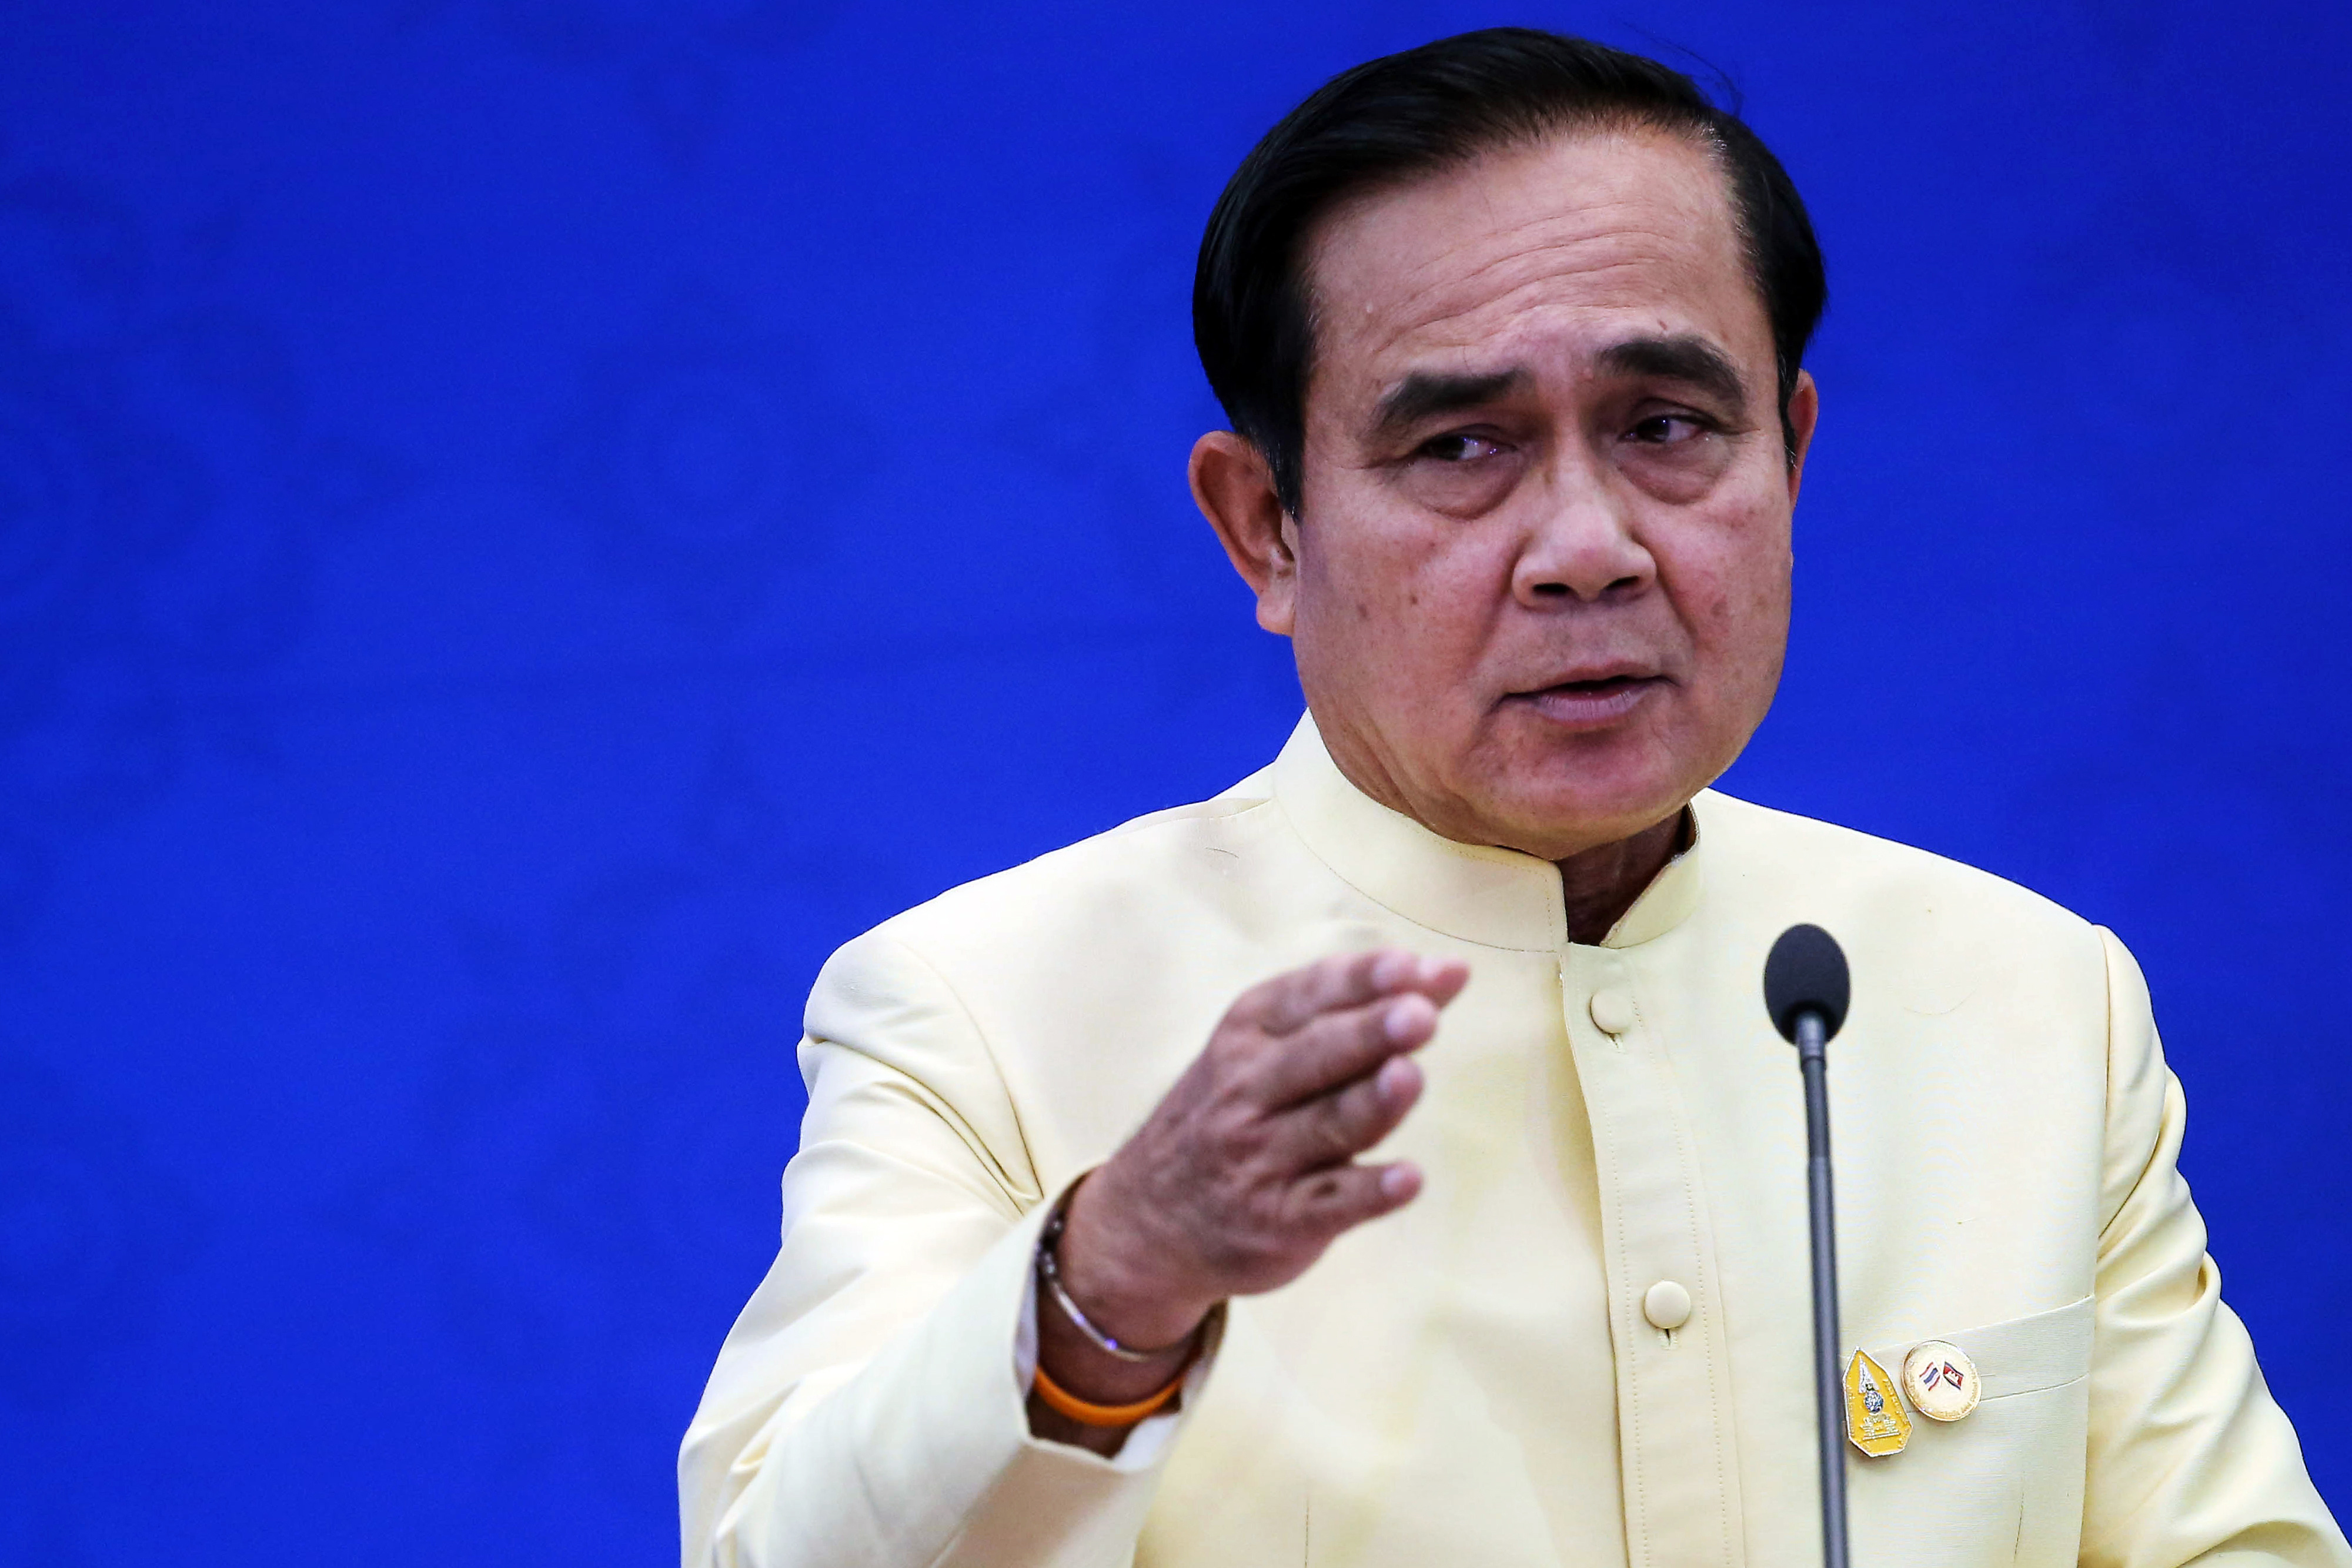 Prayuth Chan-Ocha speaks during a news conference in Bangkok on Dec. 19, 2015 (Dario Pignatelli—Bloomberg/Getty Images)